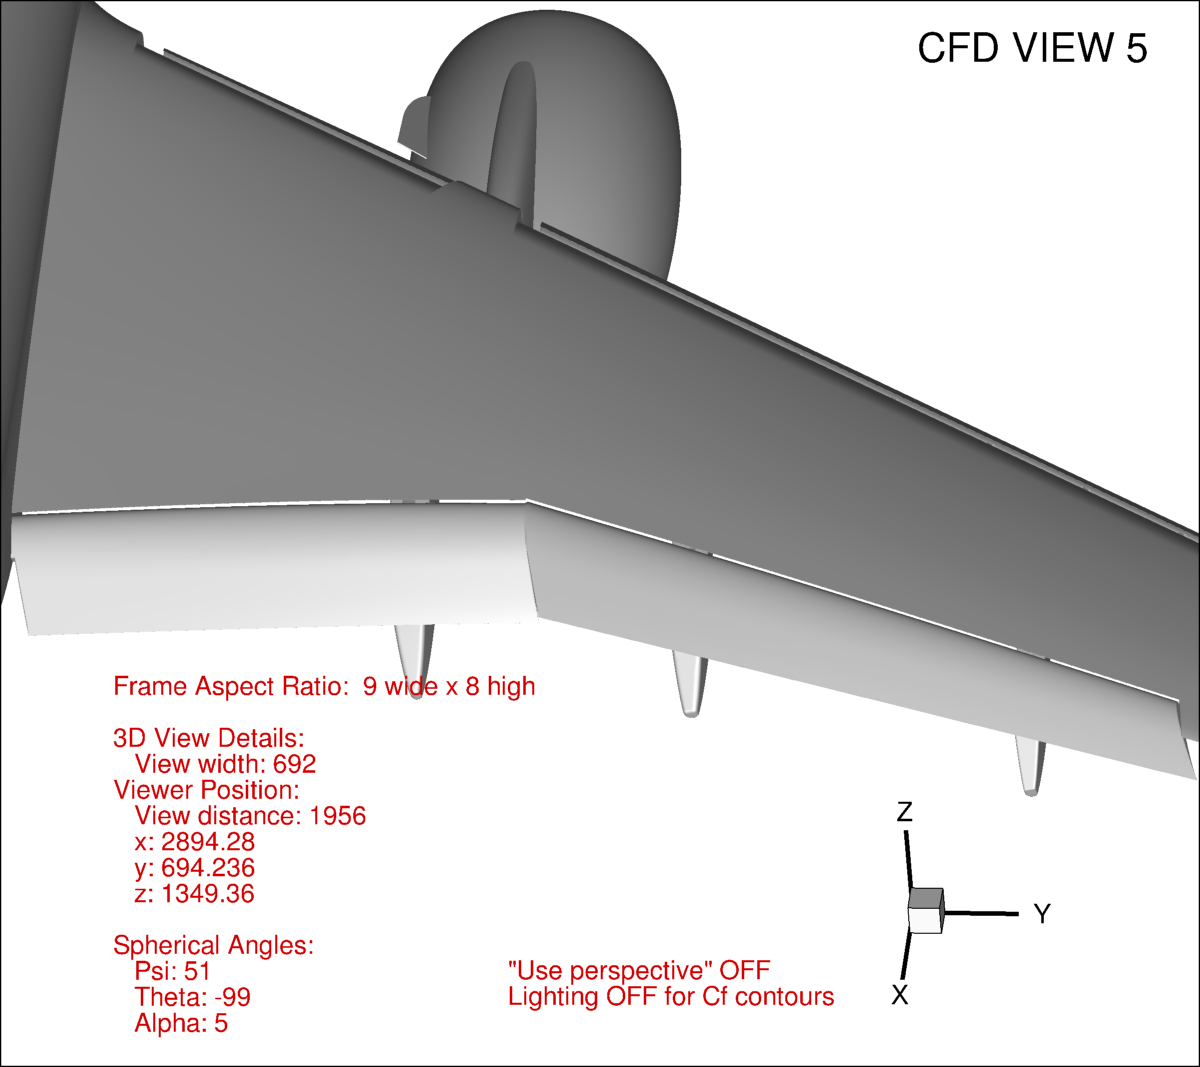 Example CFD view #5